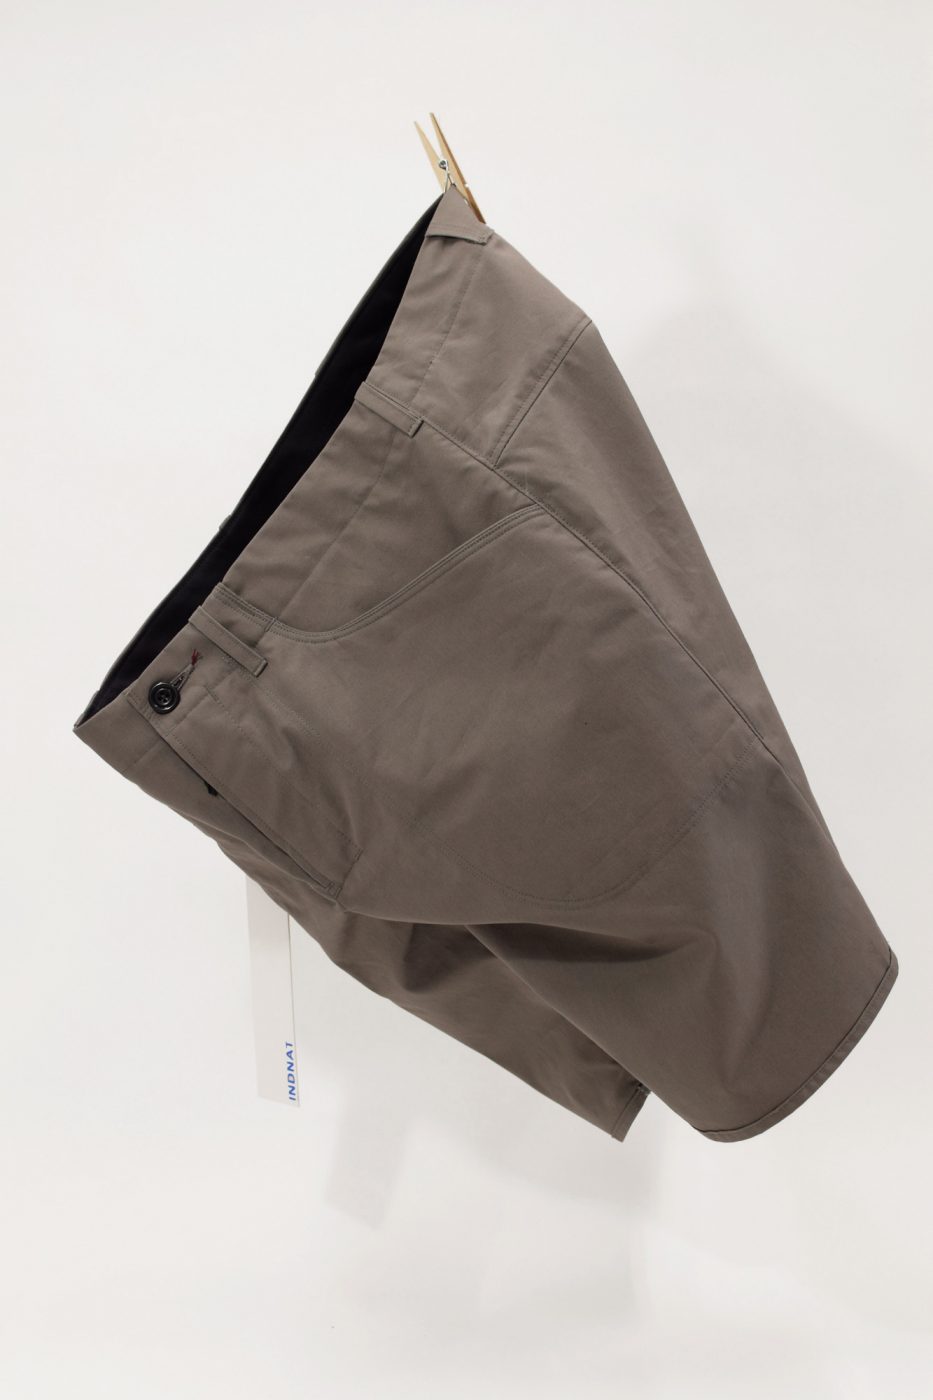 Kurze Fahrradhose / Cycling - Shorts aus EtaProof 200 Bio Stoff in der Farbe Taupe